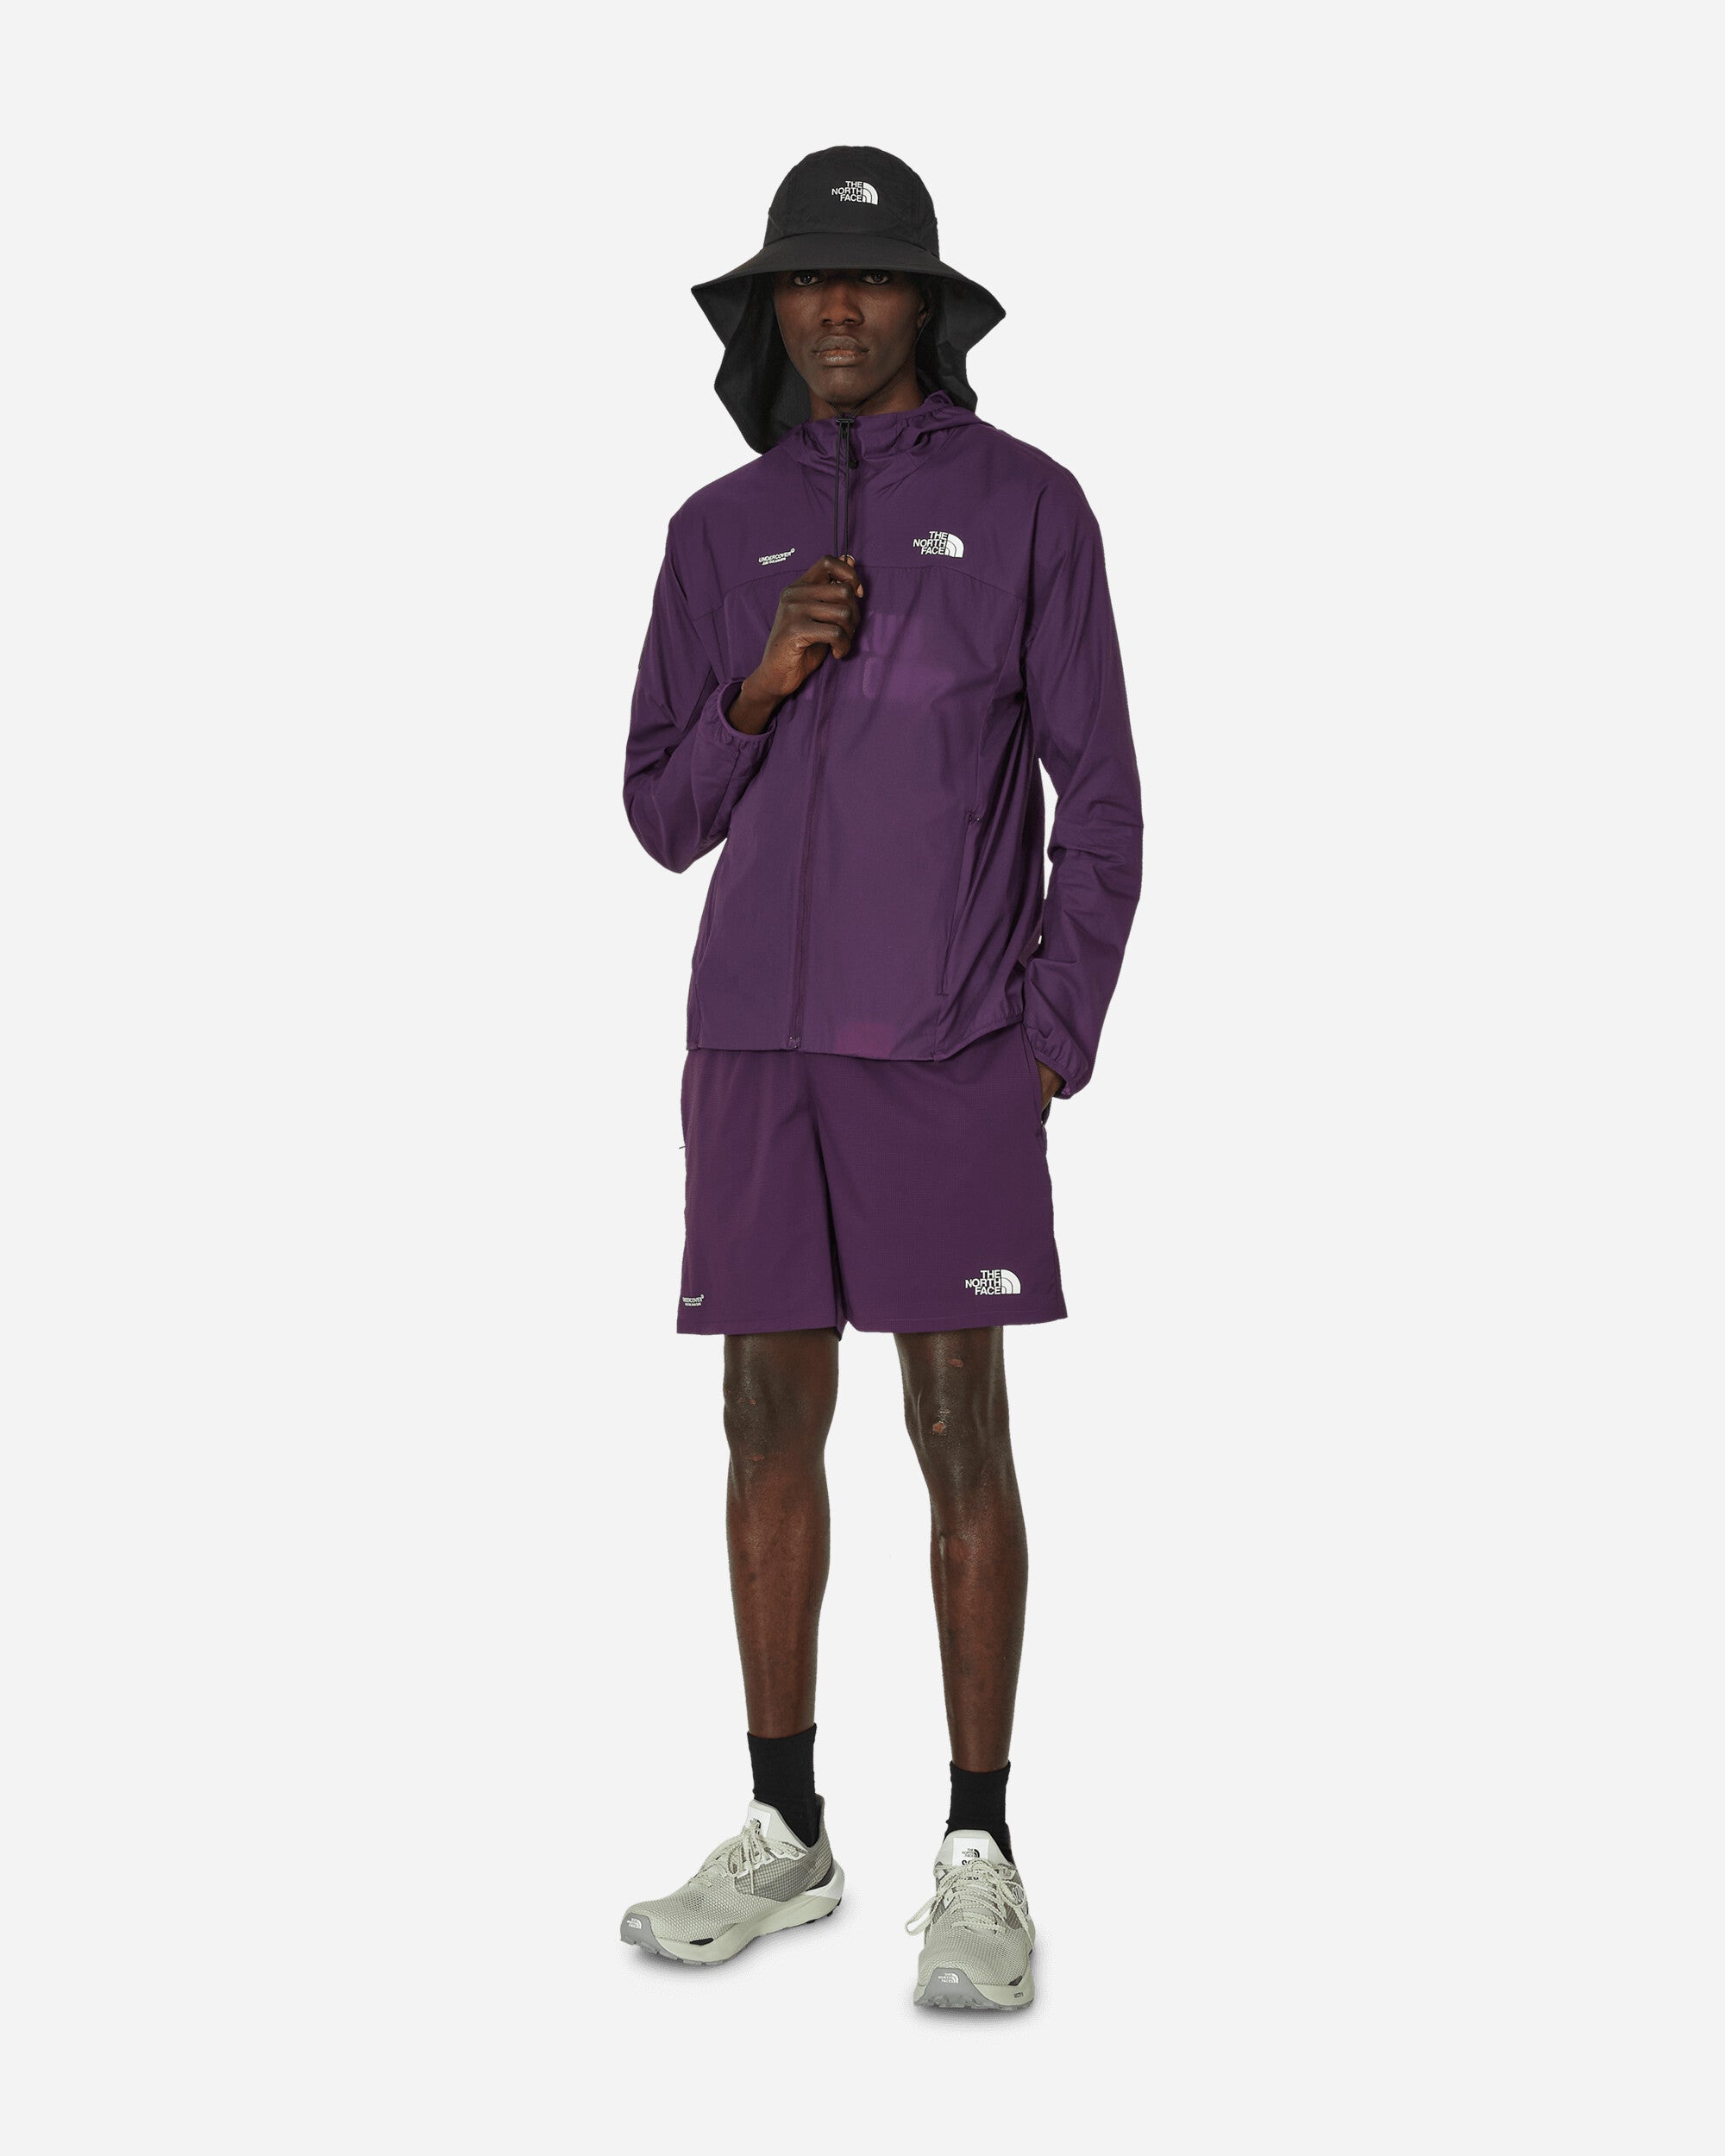 The North Face Project X Tnf X Project U Packable Light Jacket Purple Pennant Coats and Jackets Windbreakers NF0A87UG WOY1